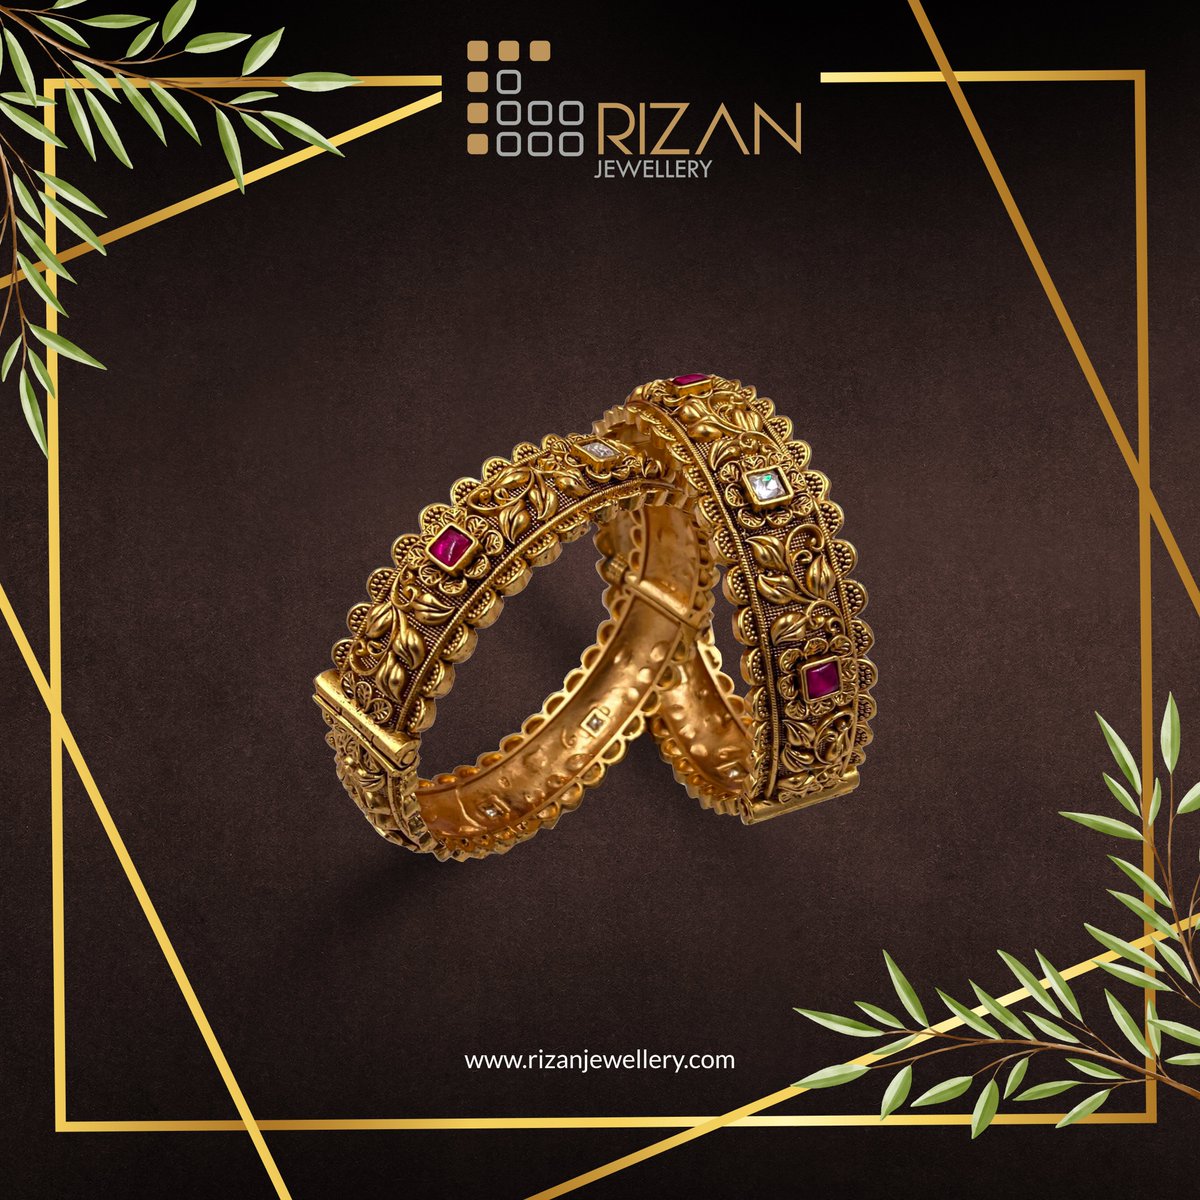 Unique design Bangles with pretty intricate patterns for the divas out there. Visit Rizan Jewellery for an amazing Bangles collection.

Shop: rizanjewellery.com

#Bangles #BuyGold #Jewellery #Gold #GoldJewelry #Dubai #UAE #JewelryOnline #ShopNow #LatestCollection #Ornaments